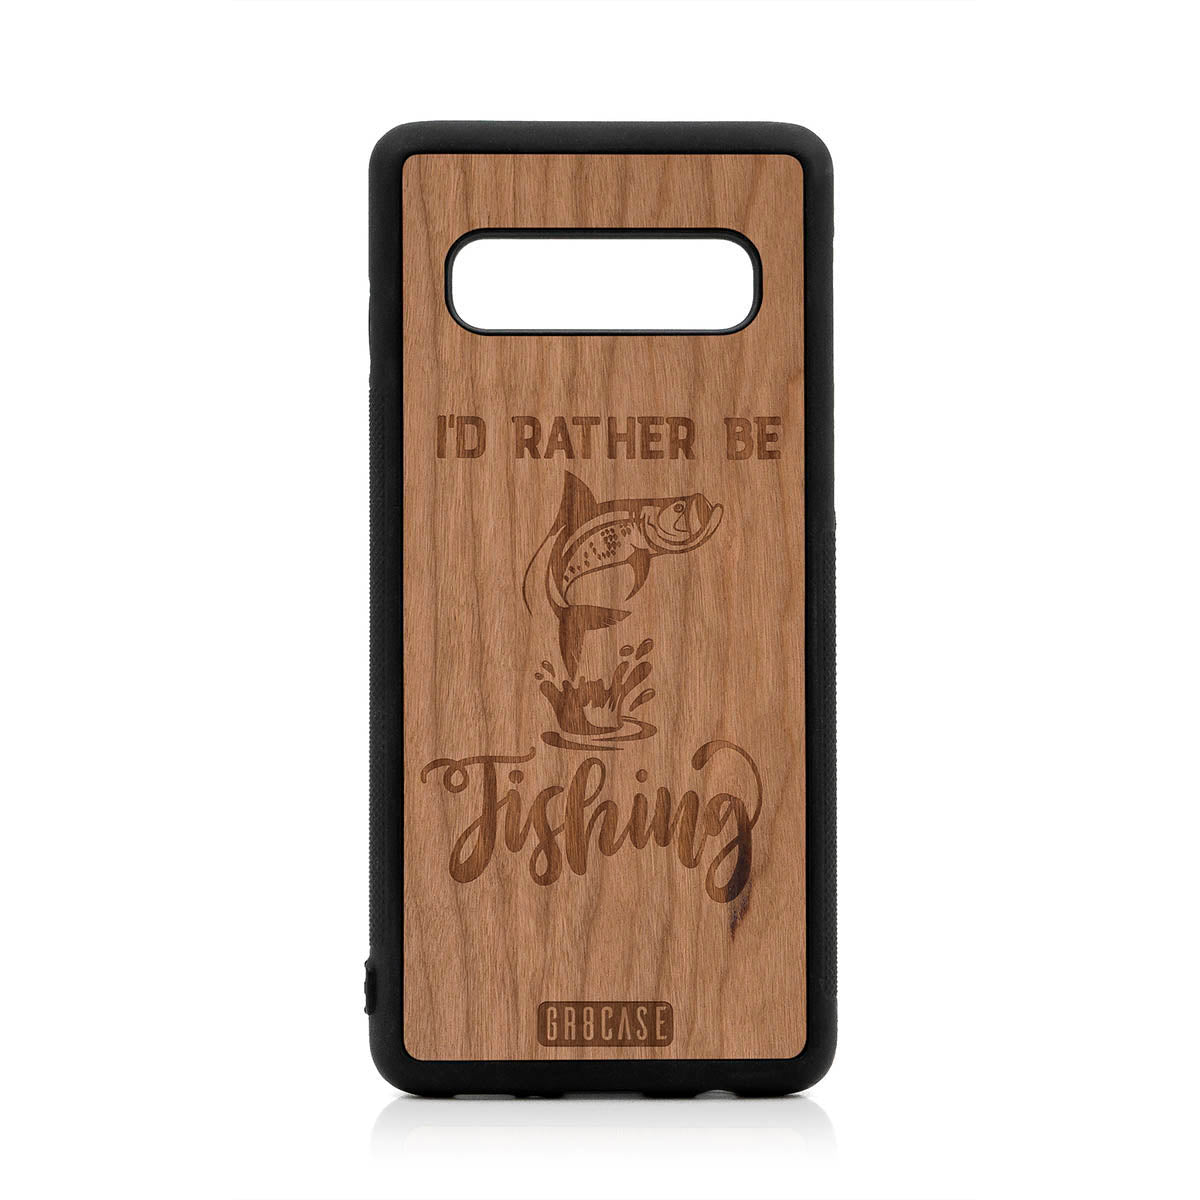 I'D Rather Be Fishing Design Wood Case For Samsung Galaxy S10